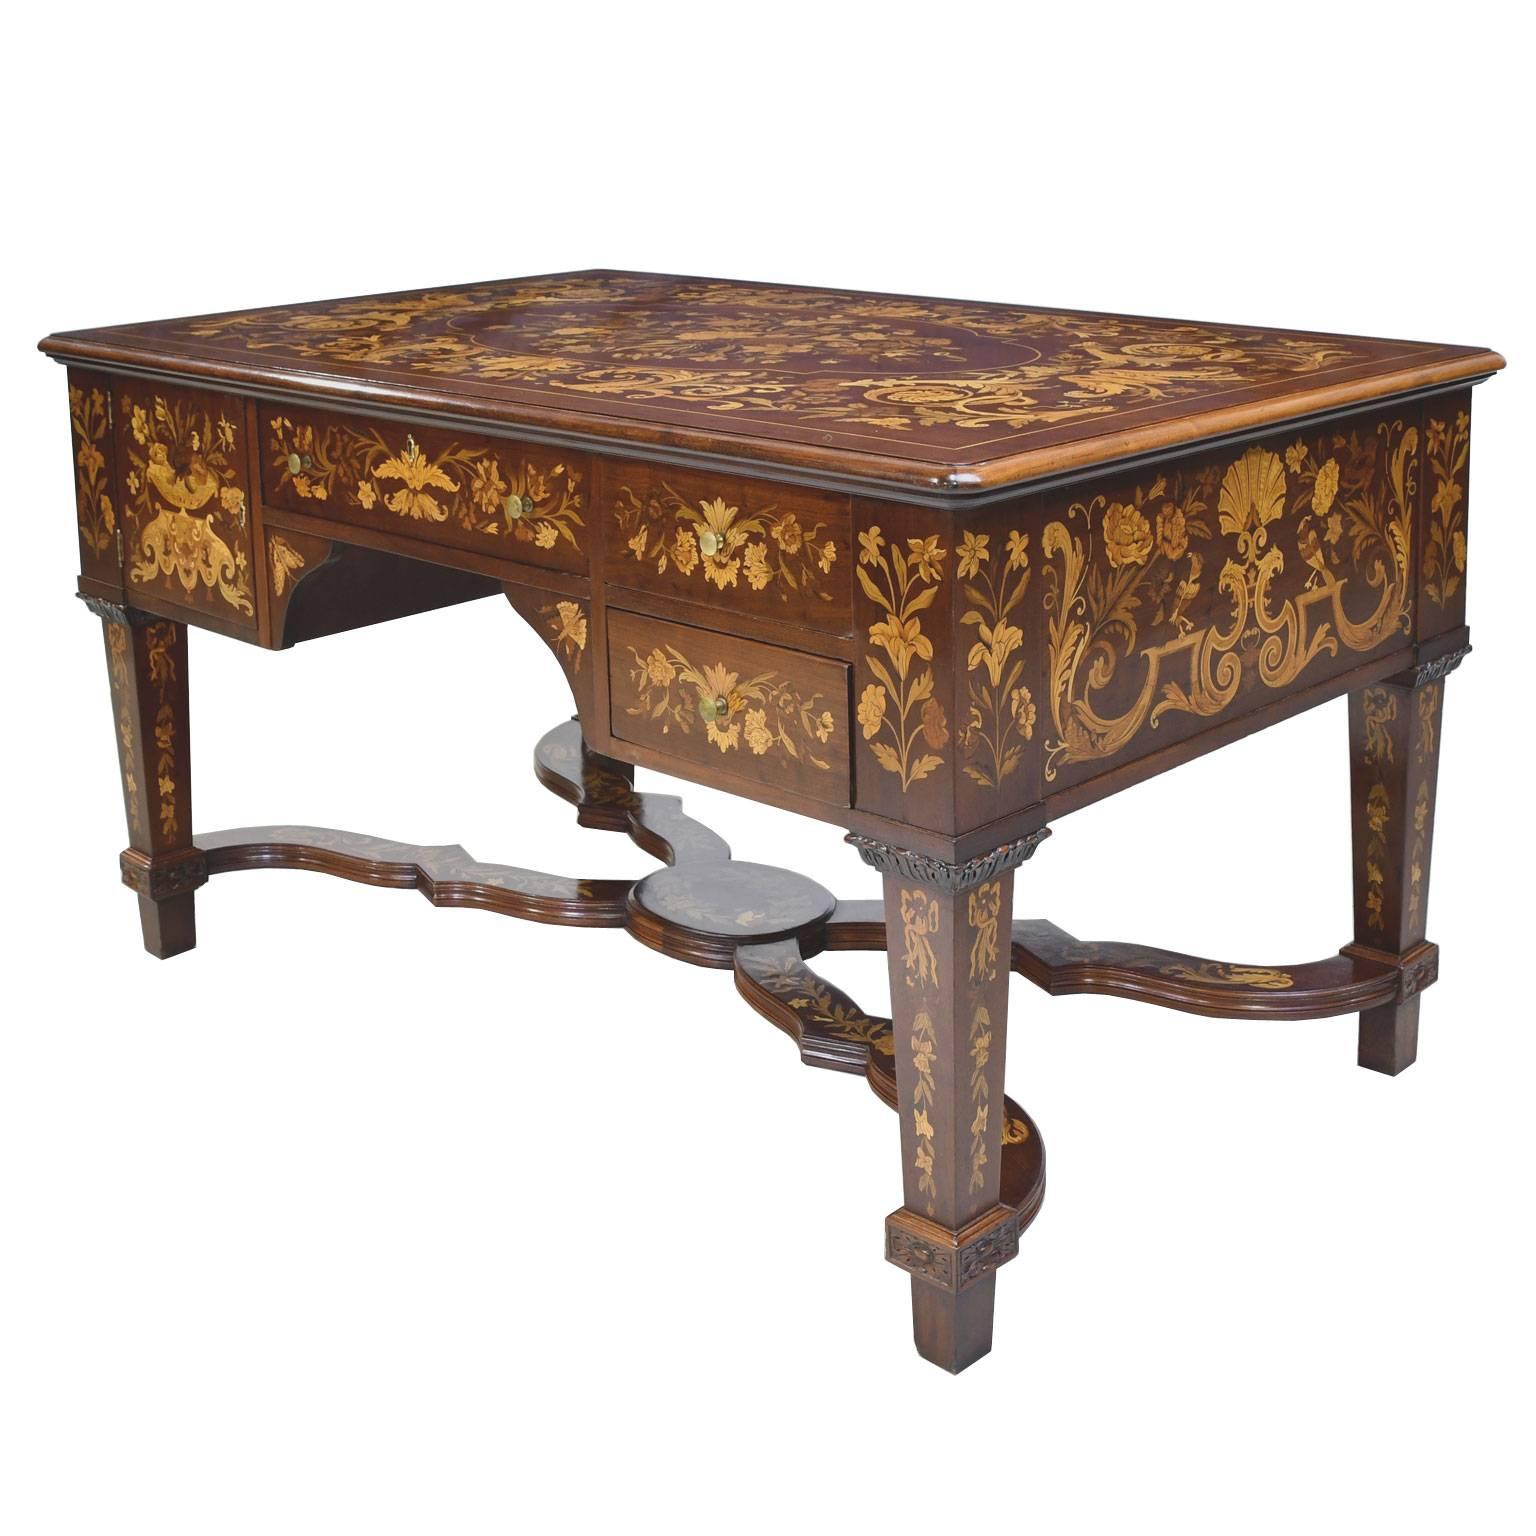 An exceptionally beautiful & functional Belle Époque partners' desk in mahogany that is identical on both sides, with working drawers & cabinet doors. Marquetry is on all surfaces, including cross stretcher on bottom, & features decorative inlays in